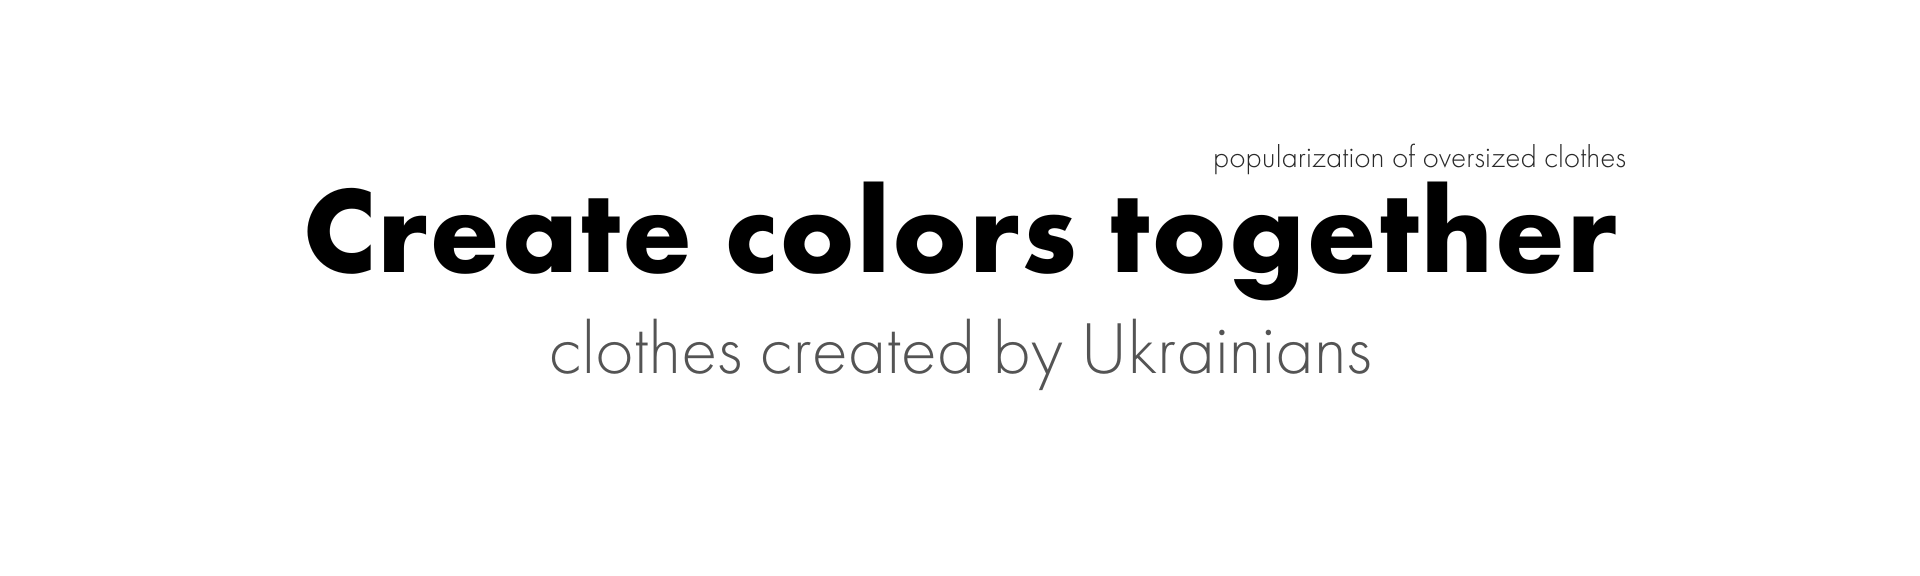 Create colors together